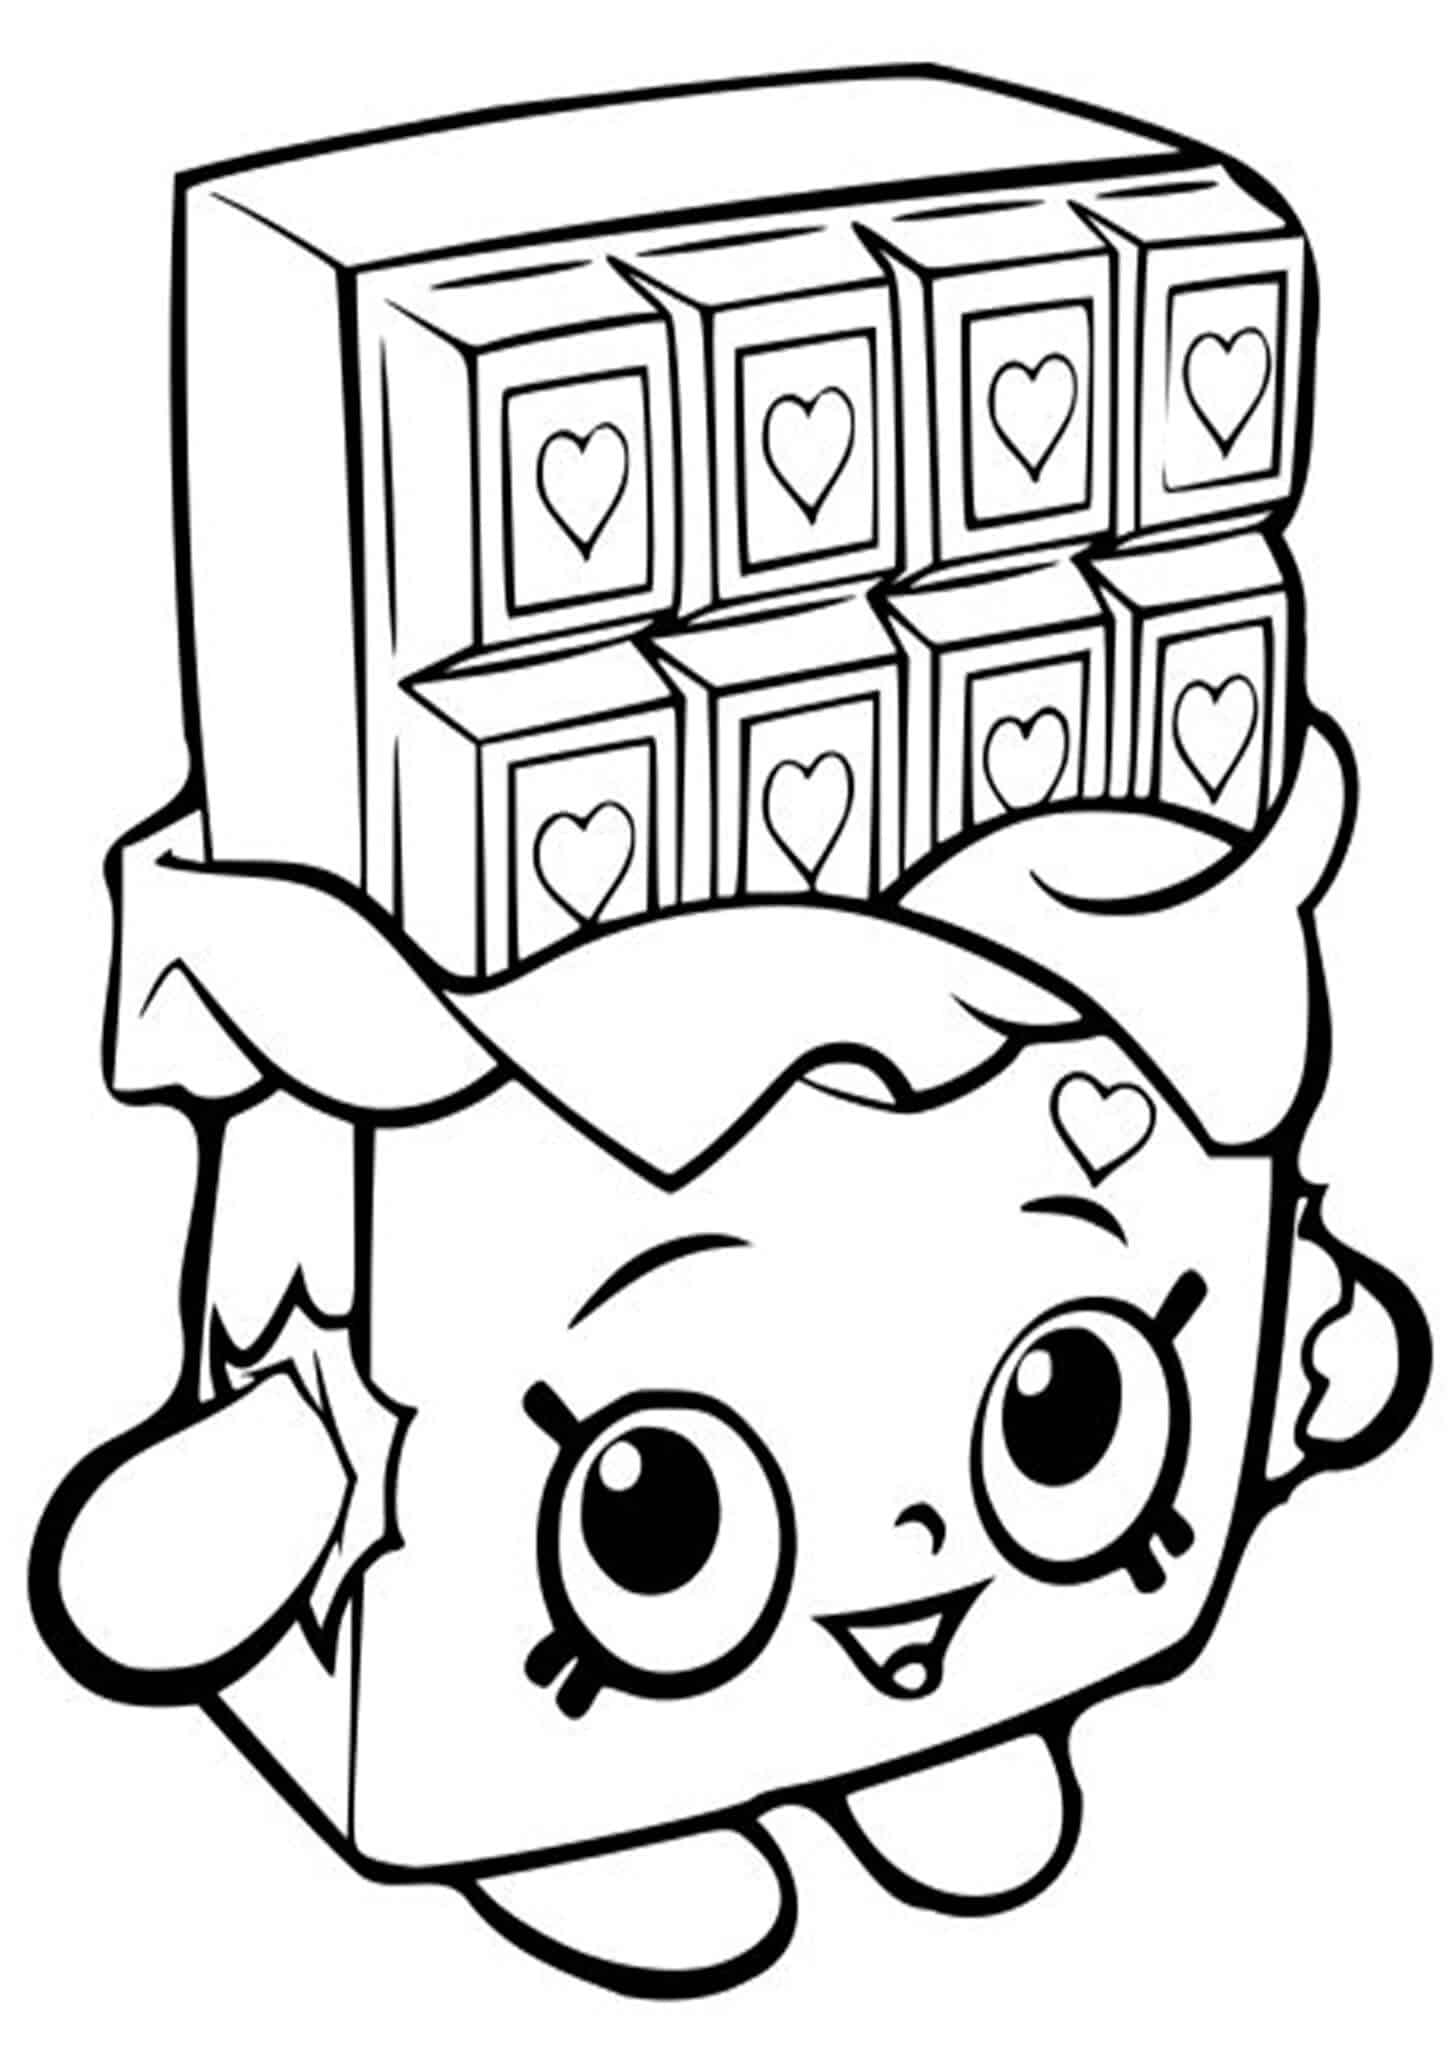 free-easy-to-print-shopkins-coloring-pages-tulamama